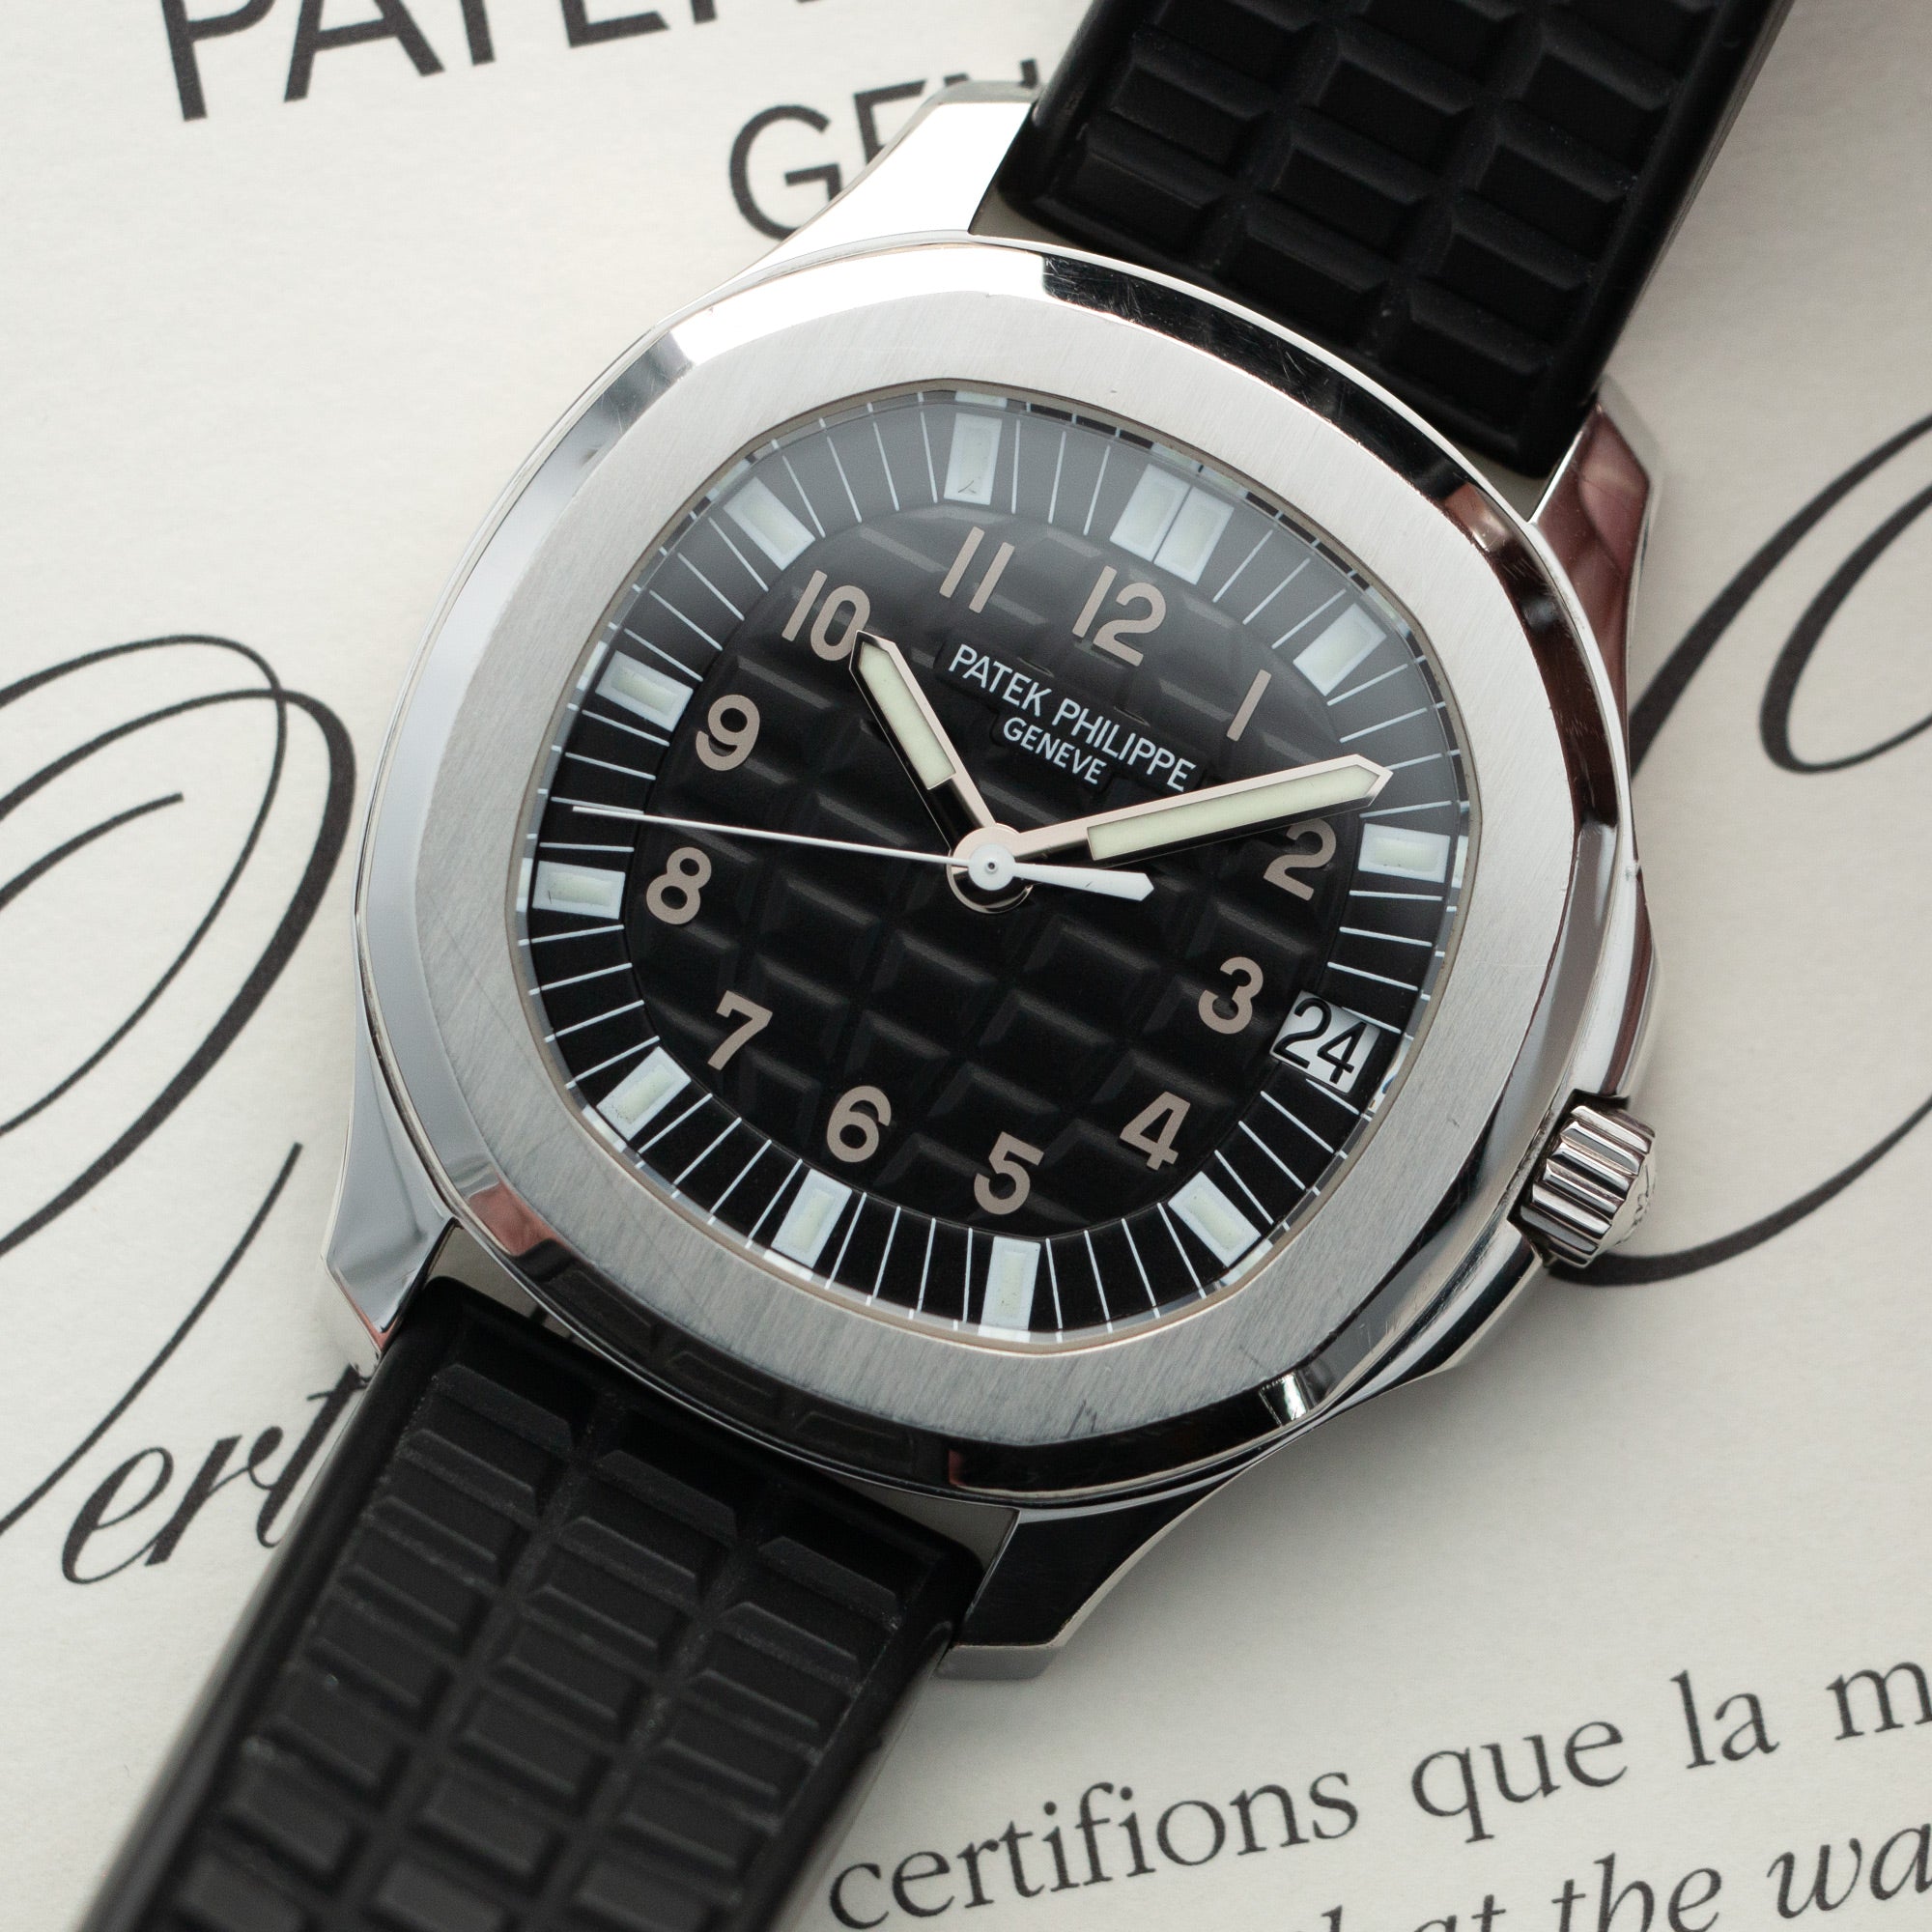 Patek Philippe - Patek Philippe Aquanaut Watch Ref. 5065 with Original Box and Papers - The Keystone Watches